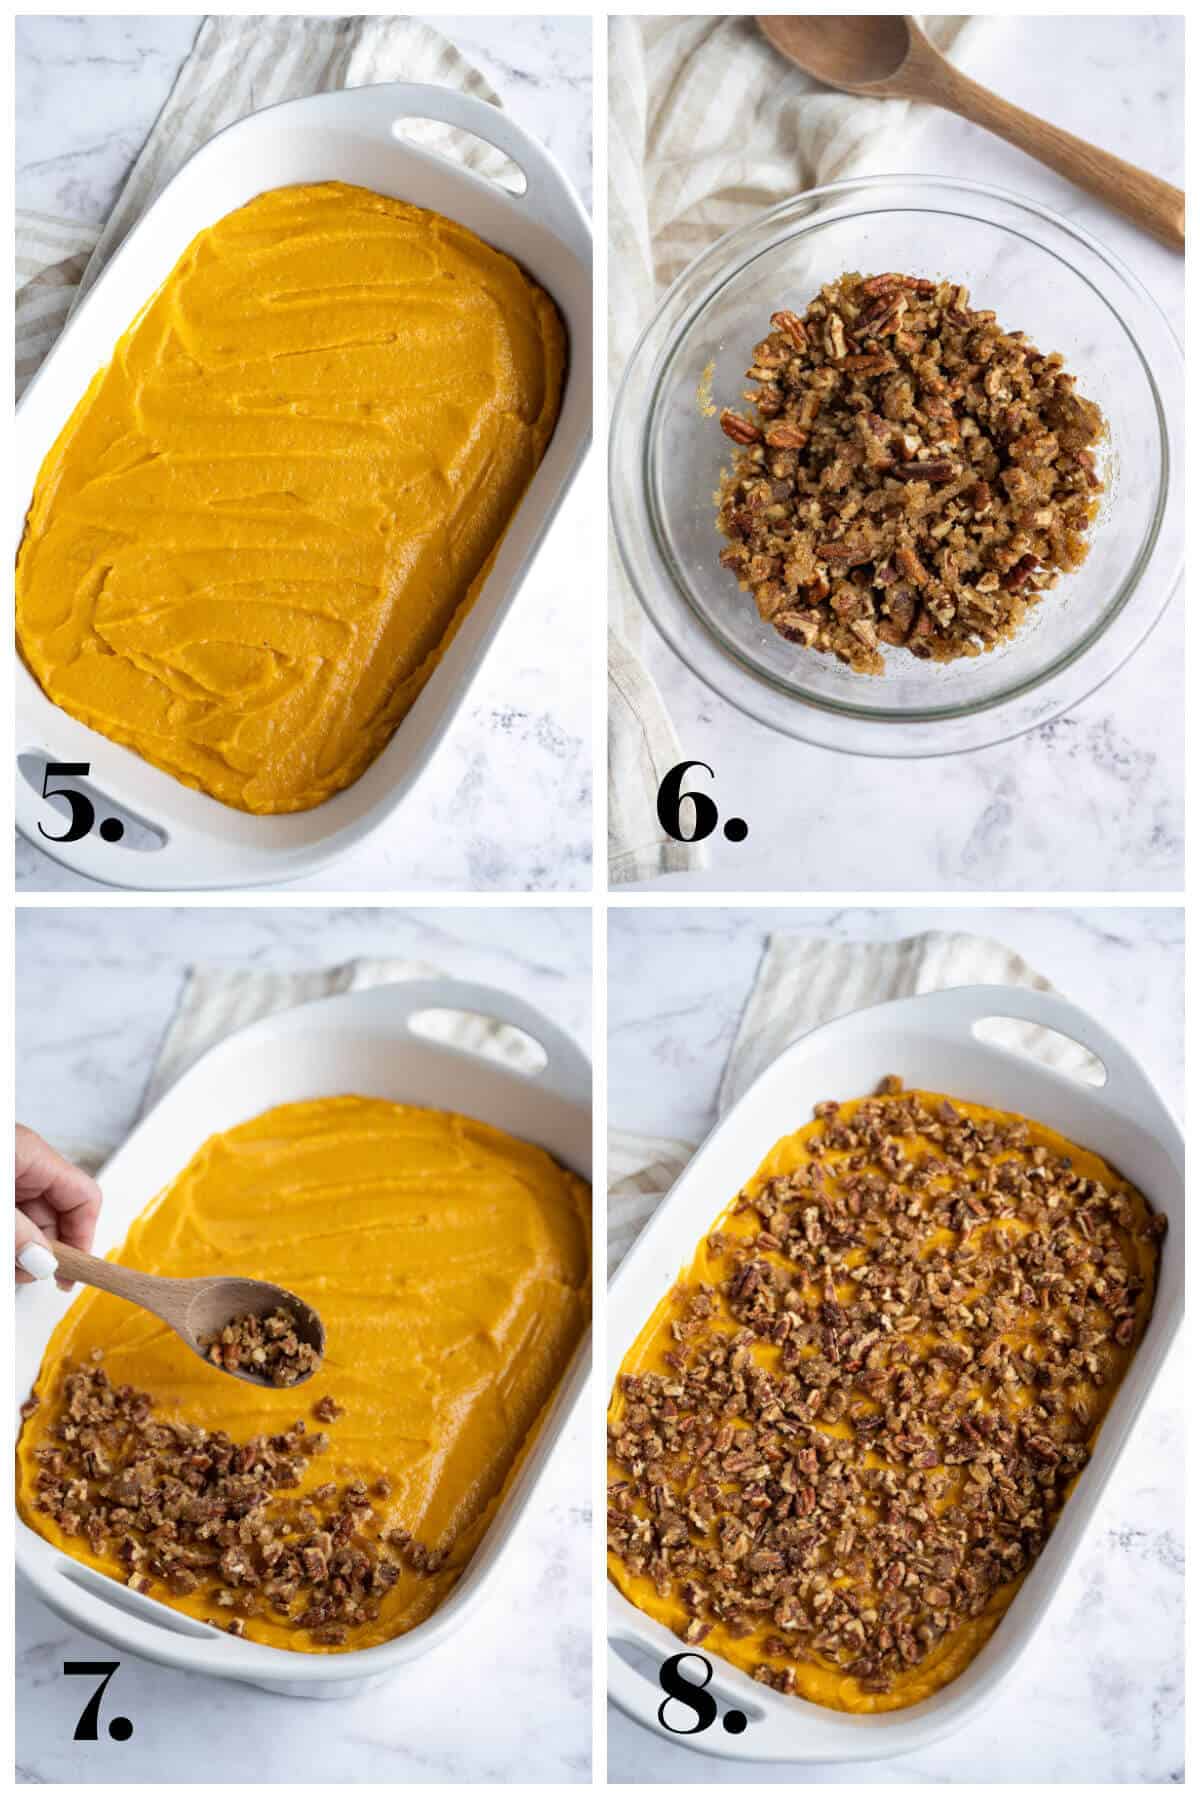 4-image collage showing how to assemble sweet potato casserole.